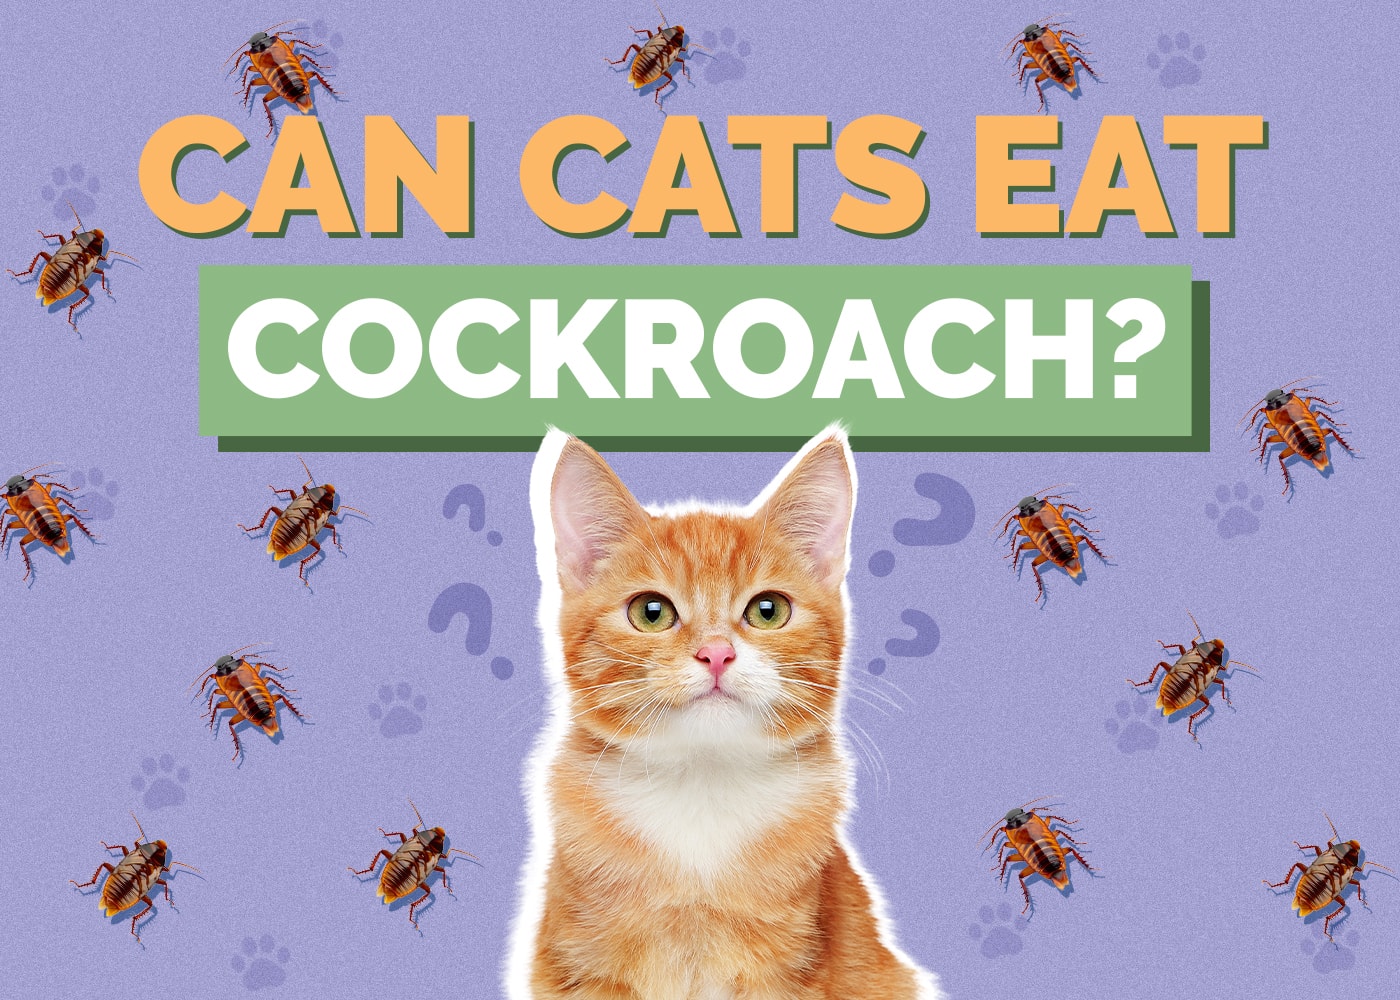 Can Cats Eat cockroach